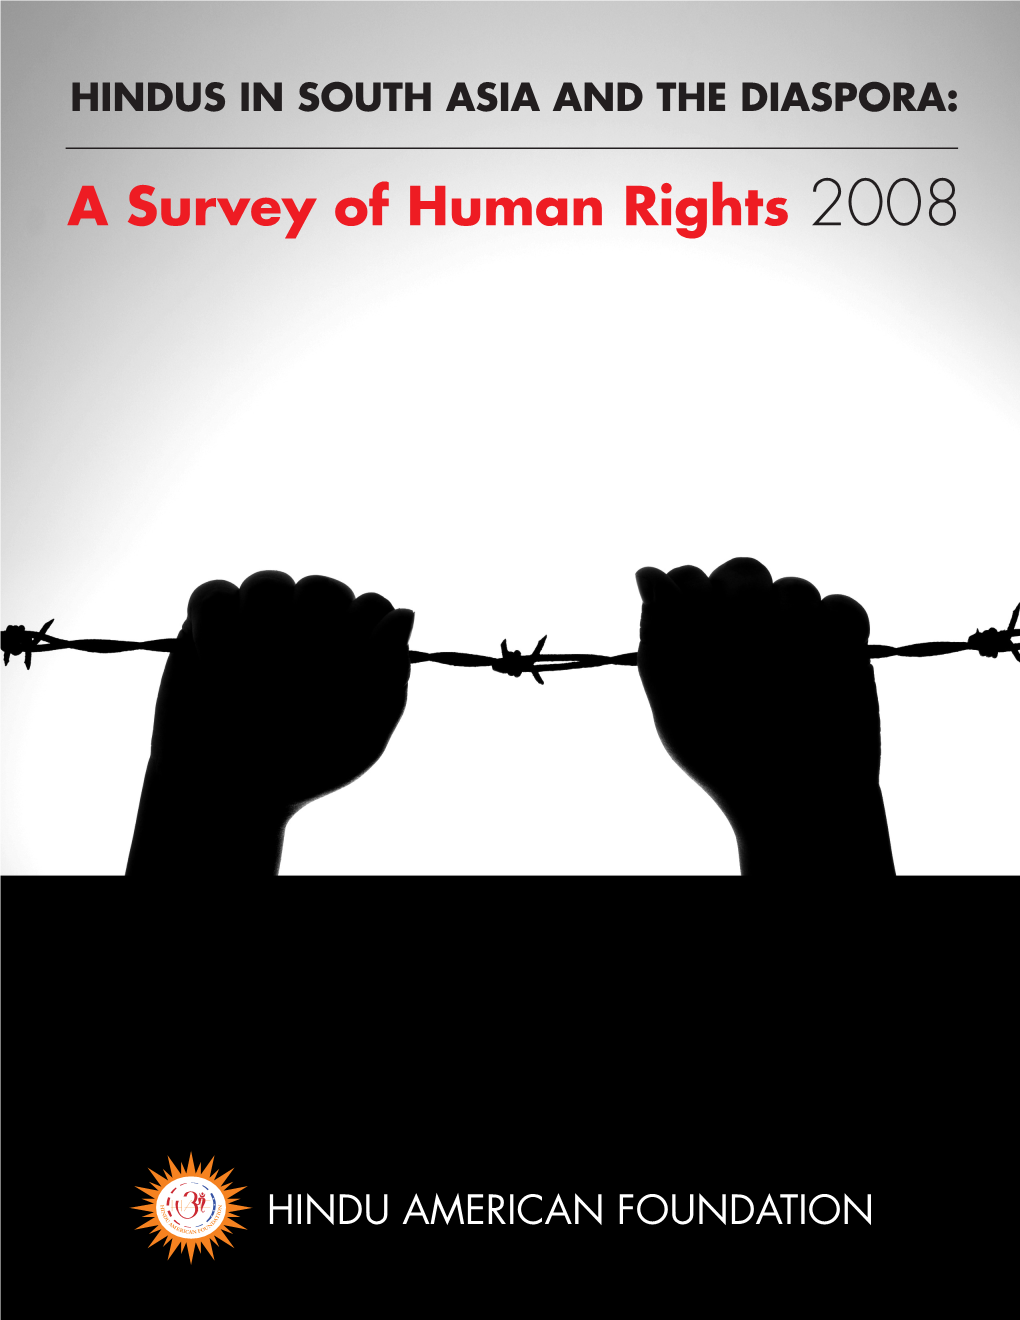 A Survey of Human Rights 2008